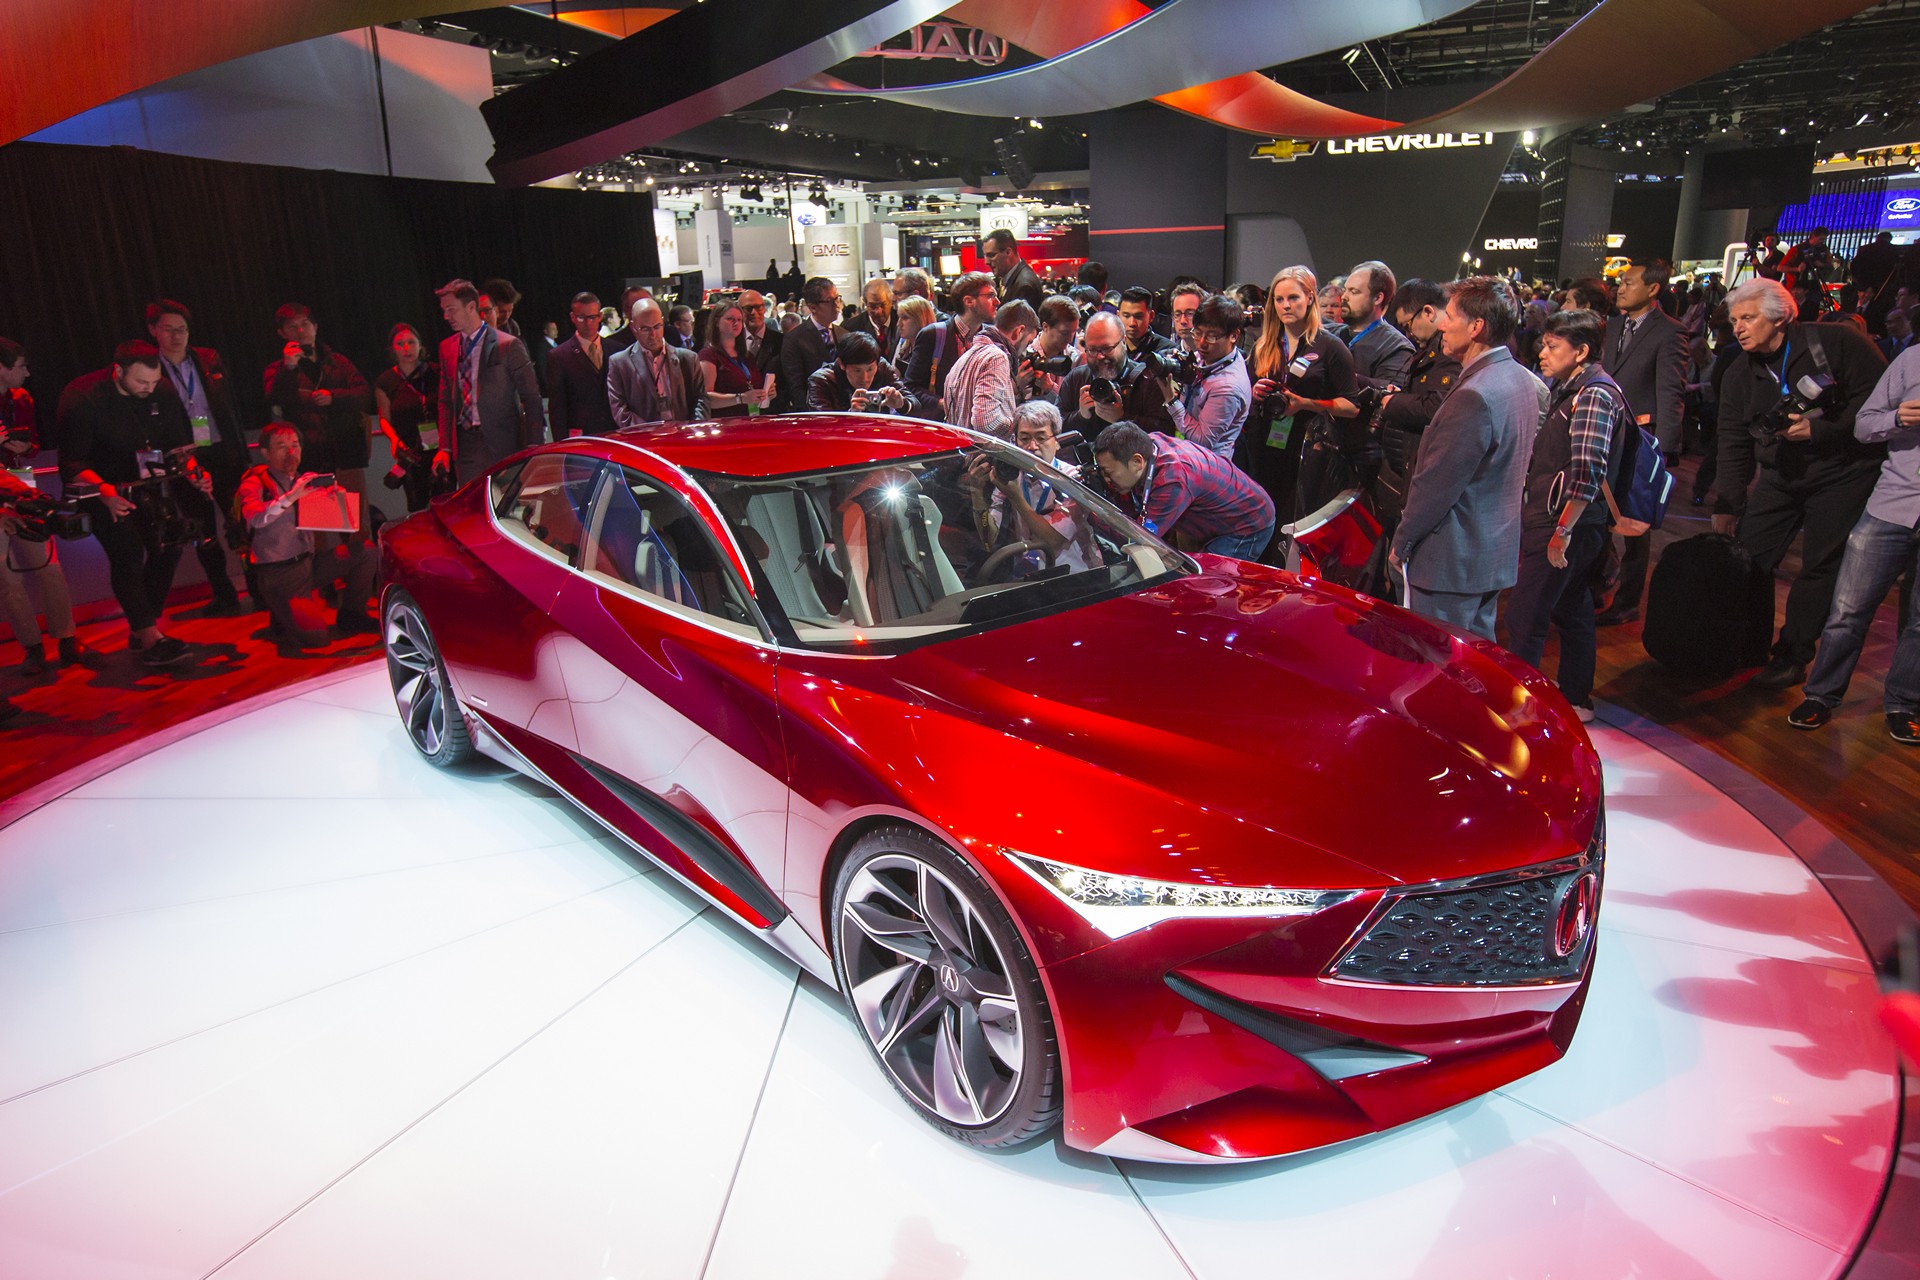 The Acura Precision Concept at its 2016 North American International Auto Show unveiling in Detroit © Honda Motor Co. Ltd.